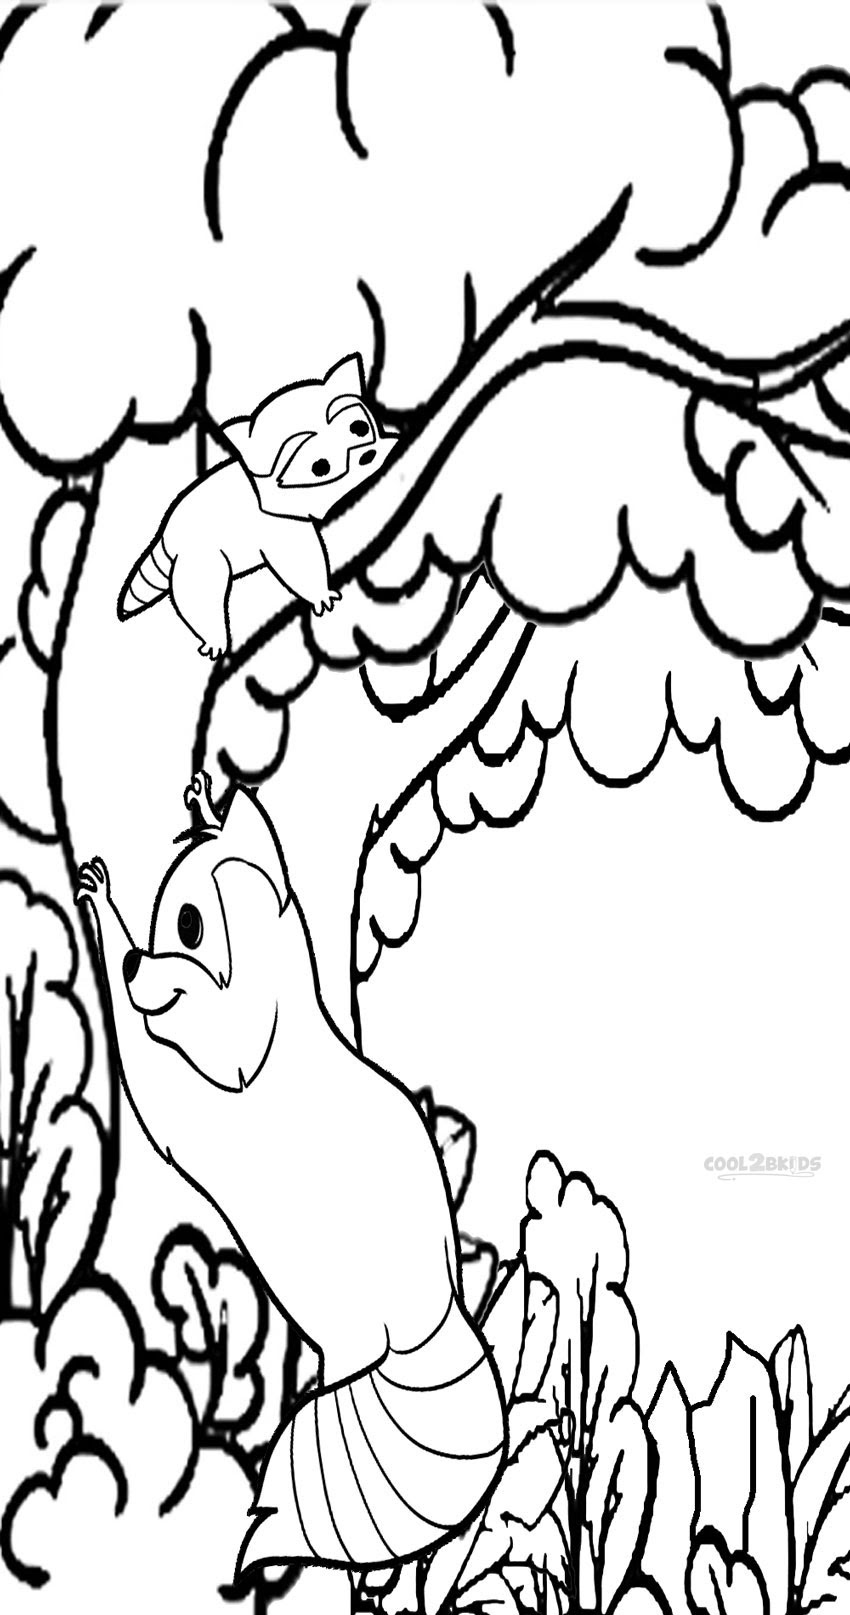 Download Printable Raccoon Coloring Pages For Kids | Cool2bKids